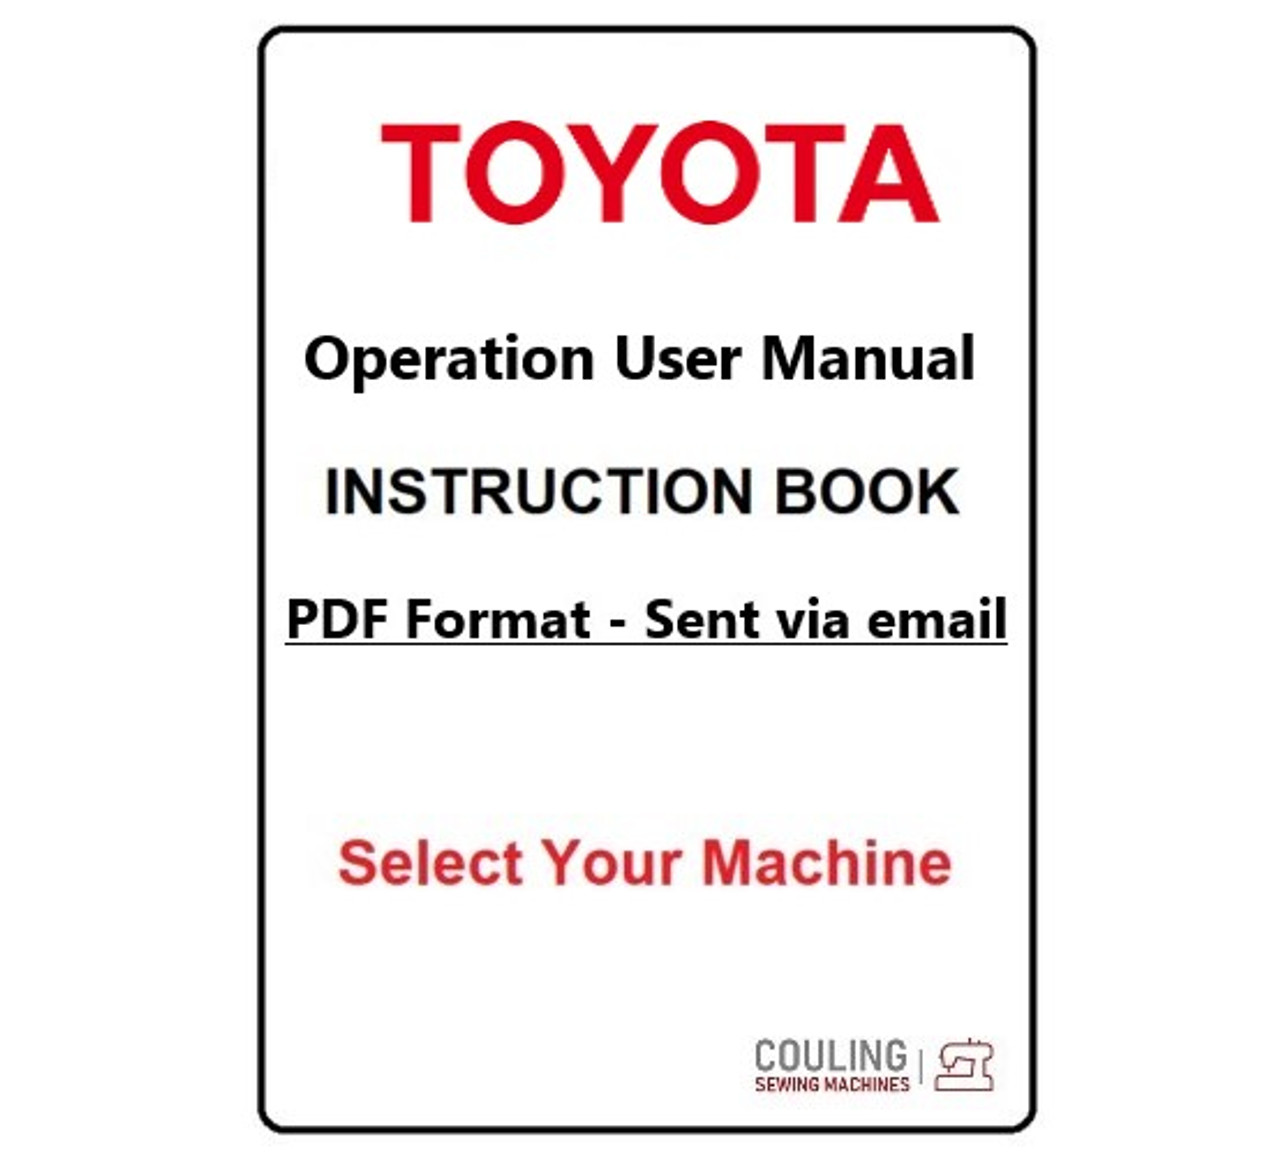 Genuine Toyota Sewing Machines User Guide Instruction Book Operation Manual  - PDF File Format Only - Couling Sewing Machines